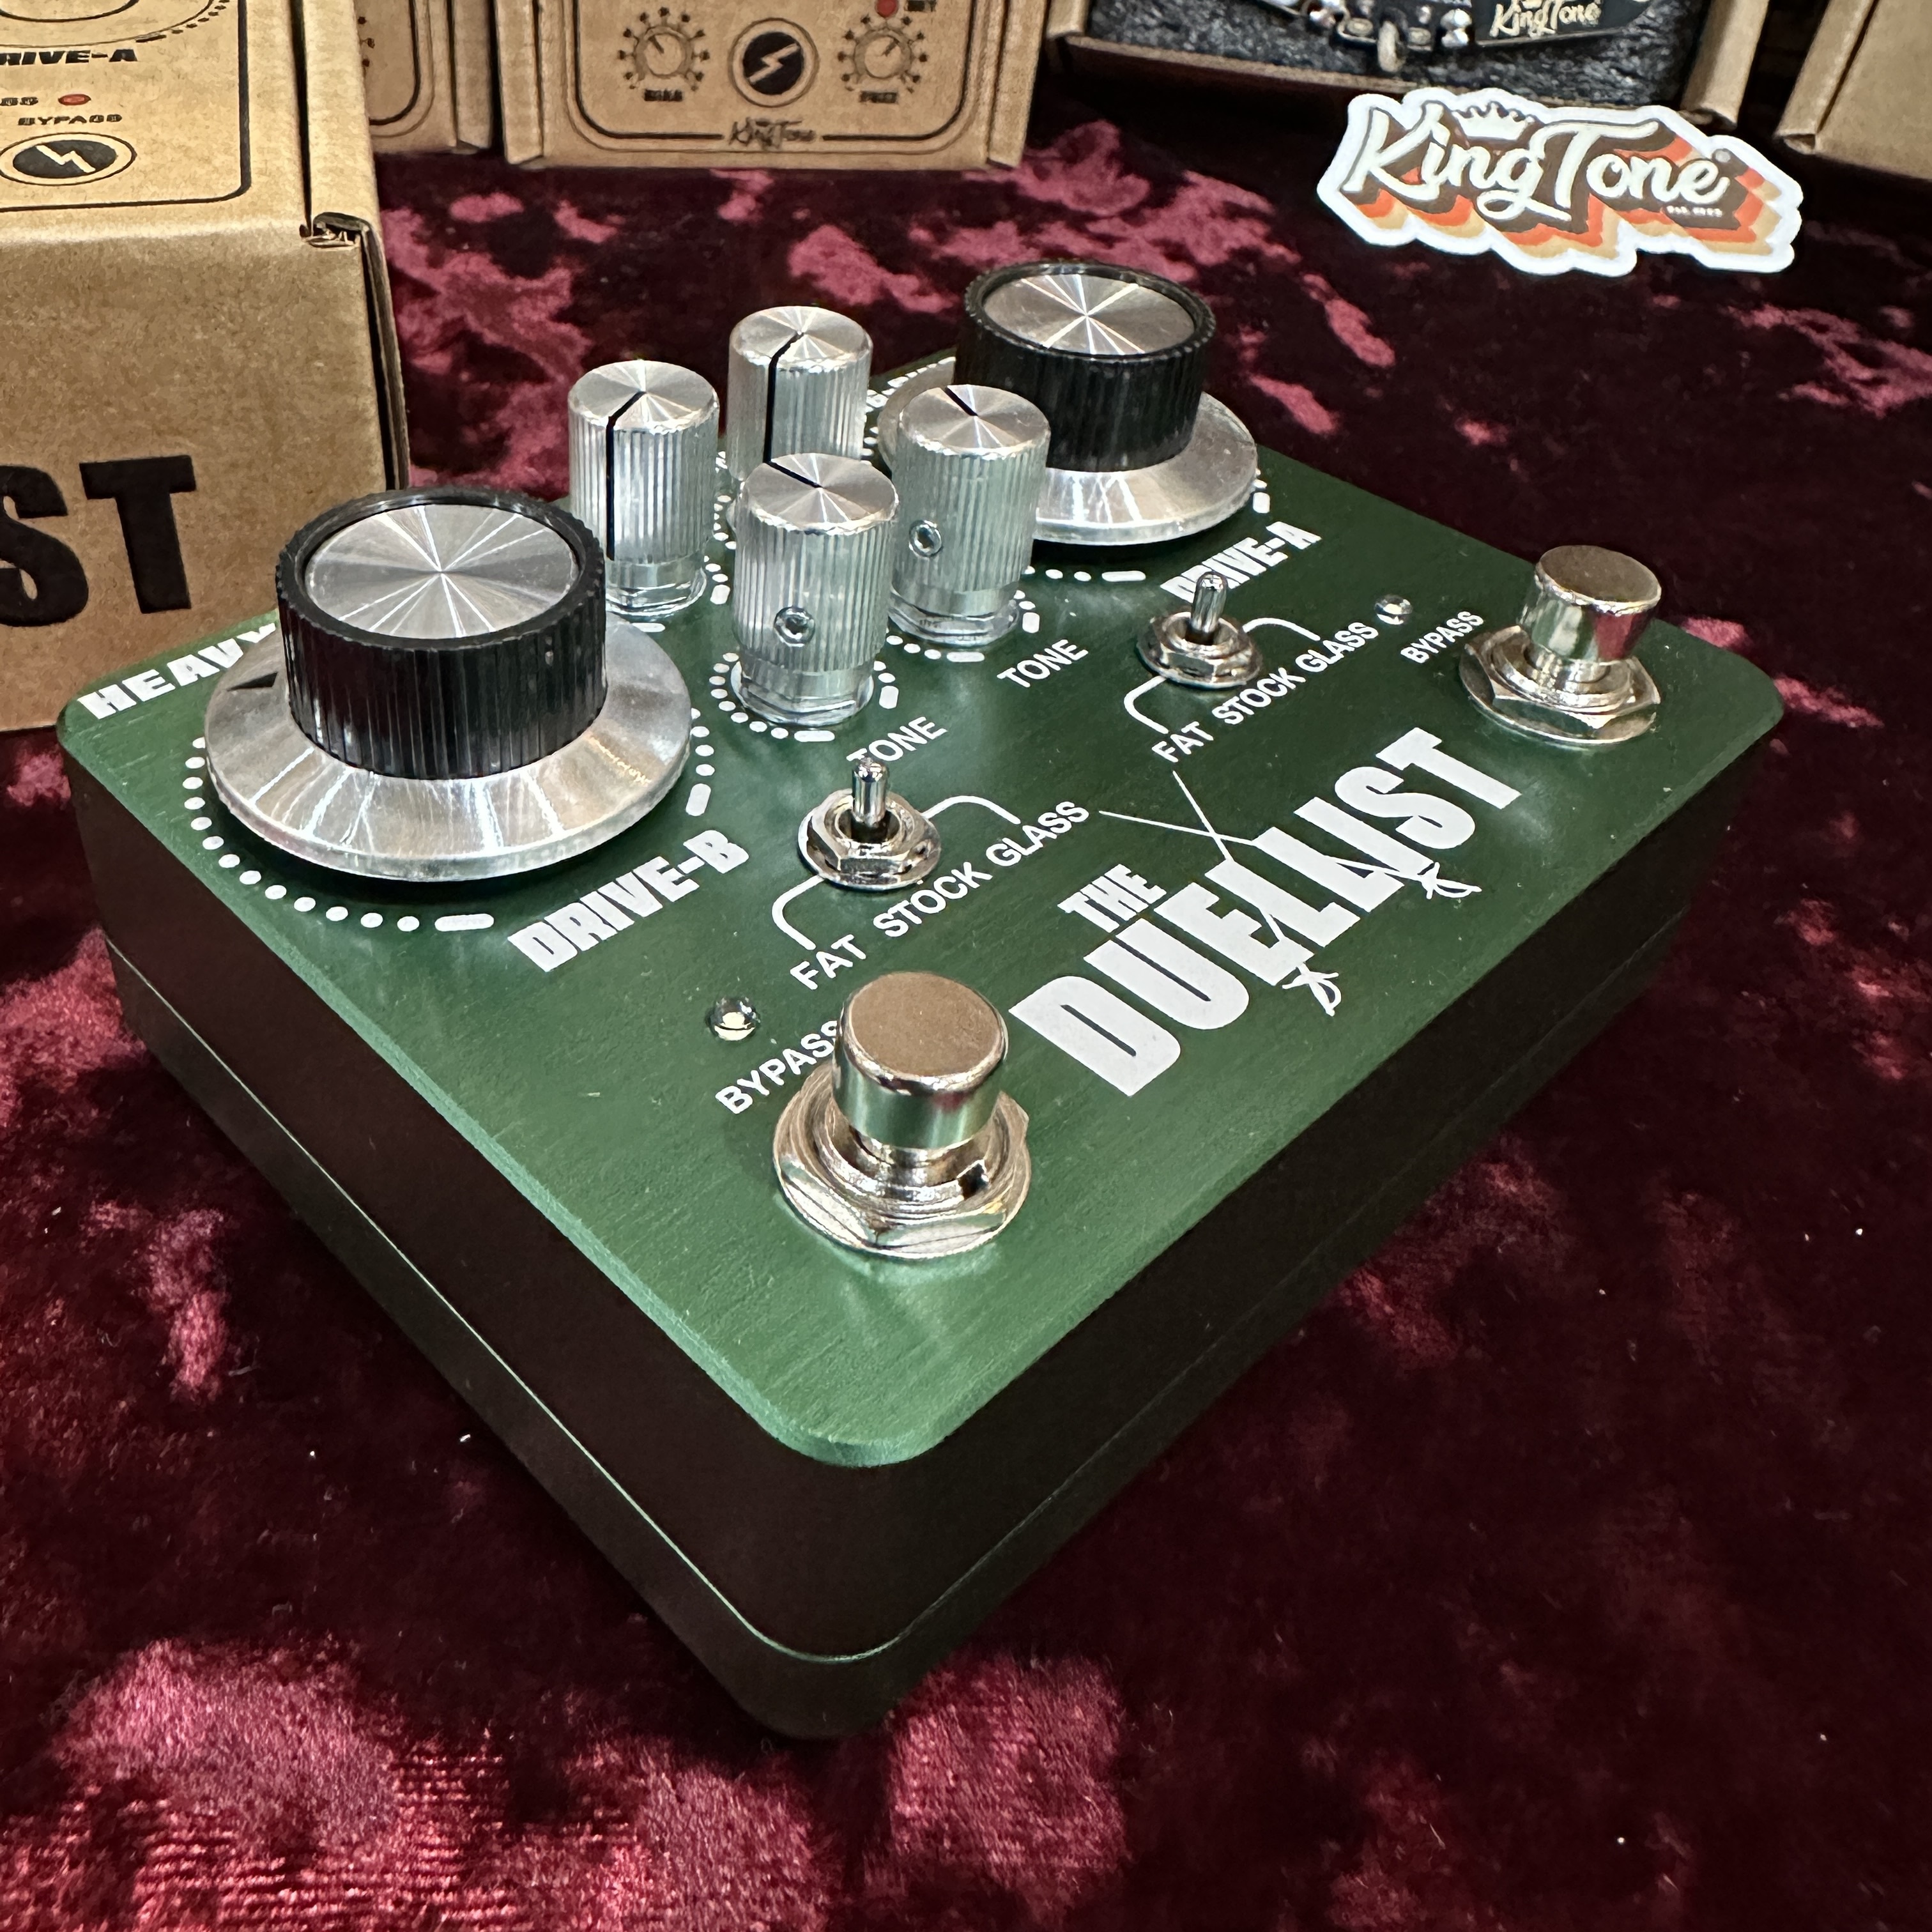 King Tone The Duellist Green Overdrive 破音效果器